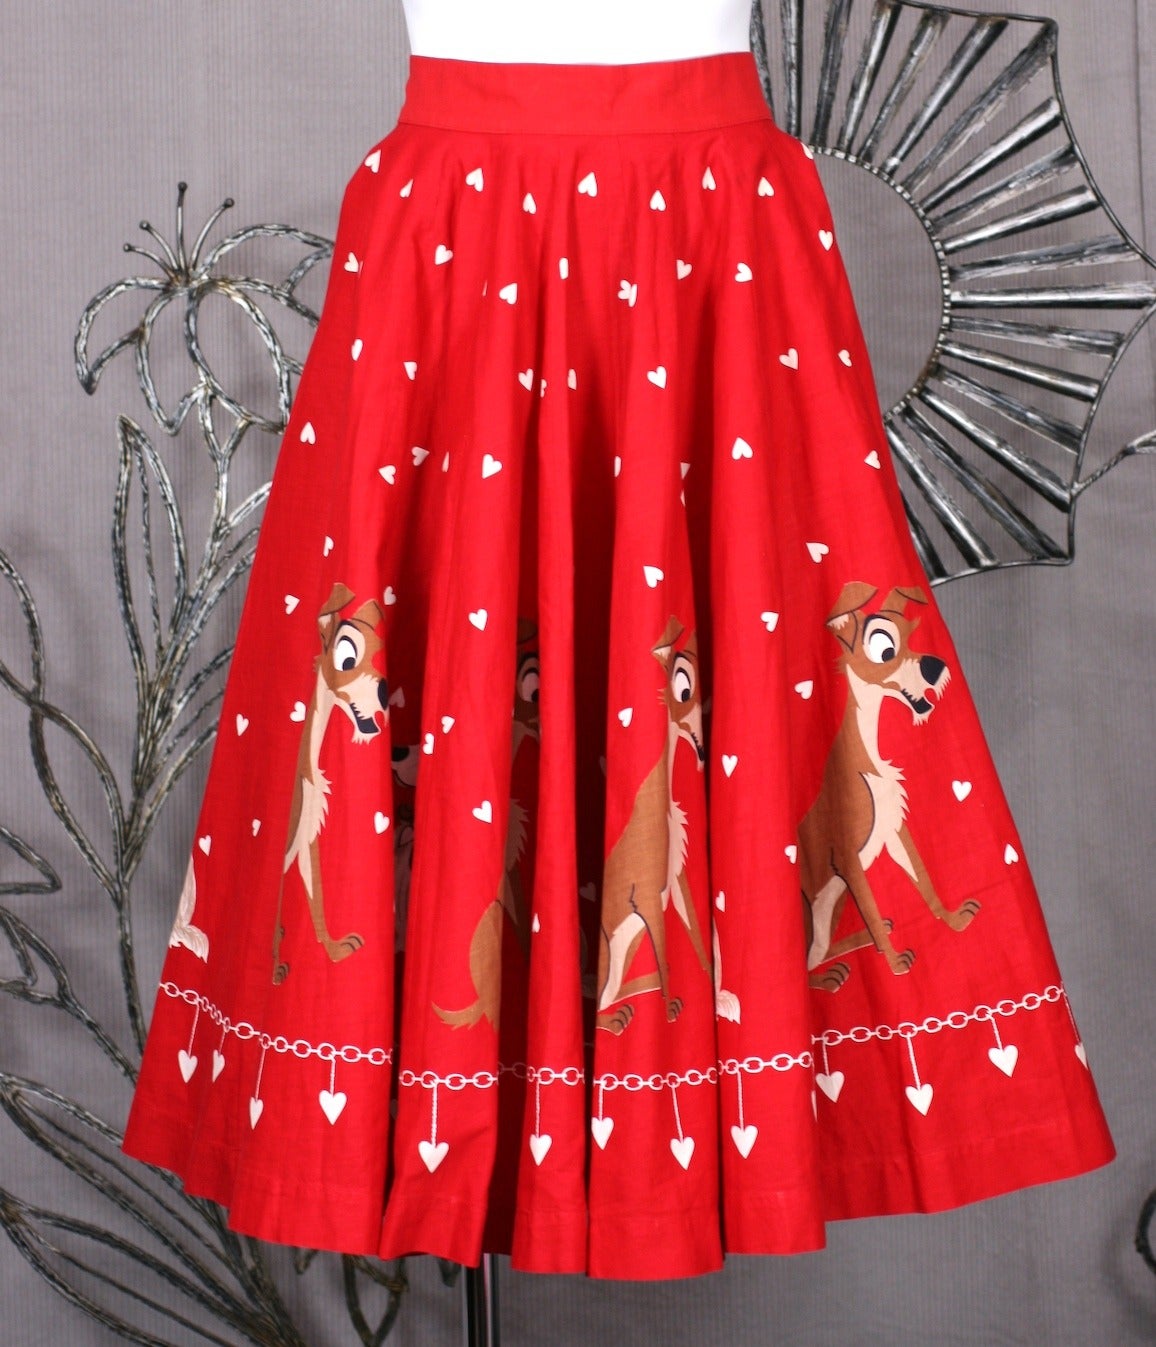 18 panel Lady and the Tramp collectible Disney skirt.. Originally sold in kits, this charming red cartoon circle skirts is covered with hearts, chains and the enamored couple along the hem. Dress maker quality. Excellent condition. 
The 18 Panel